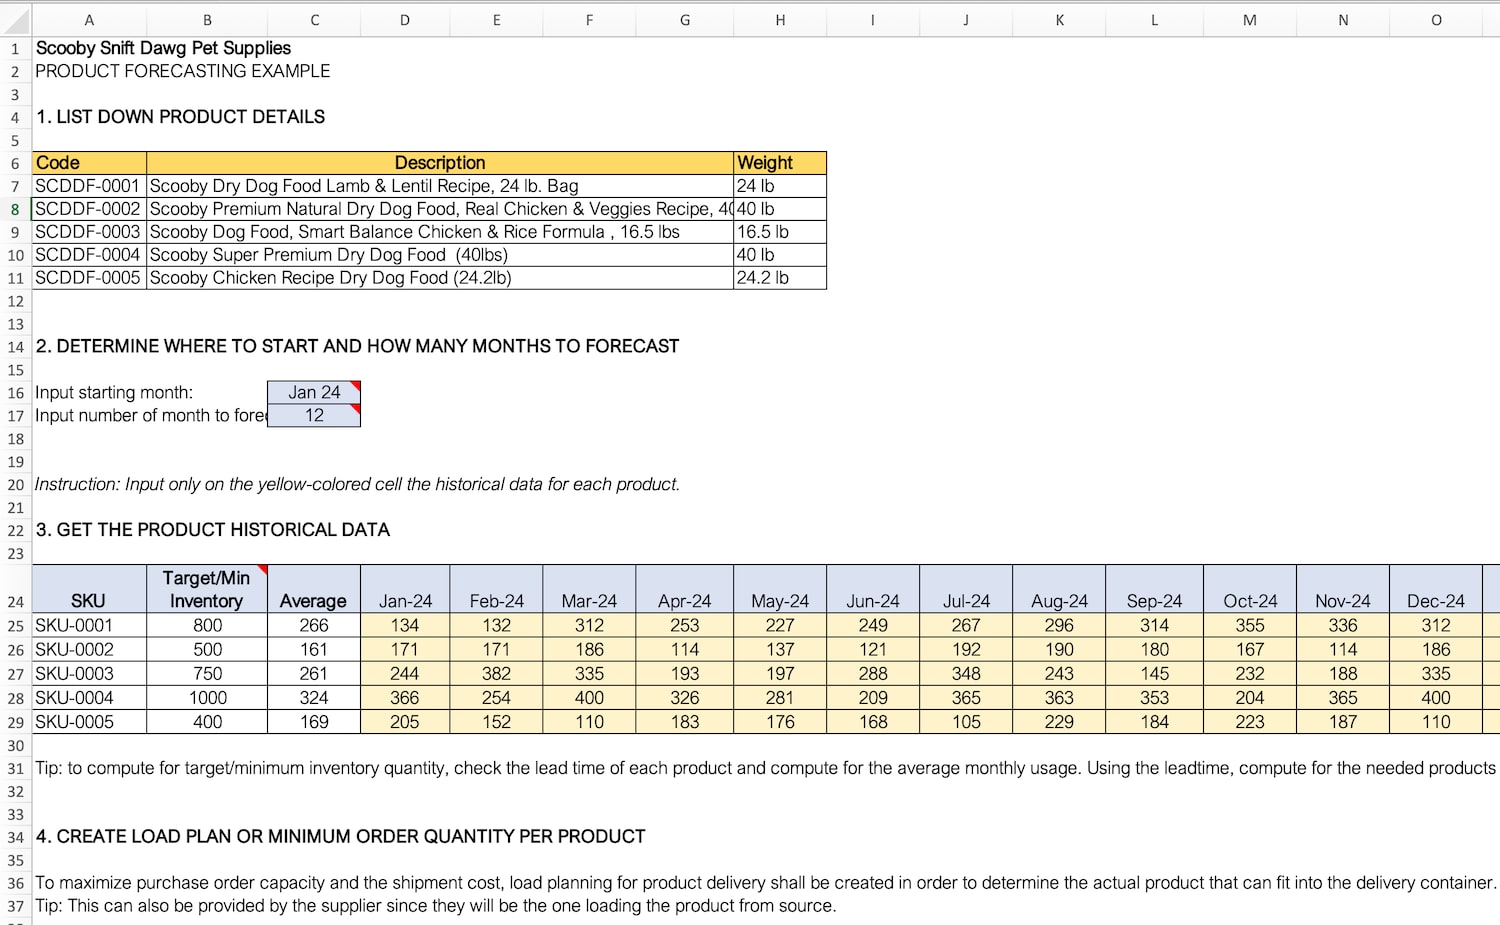 I have included the forecasting example in this spreadsheet.